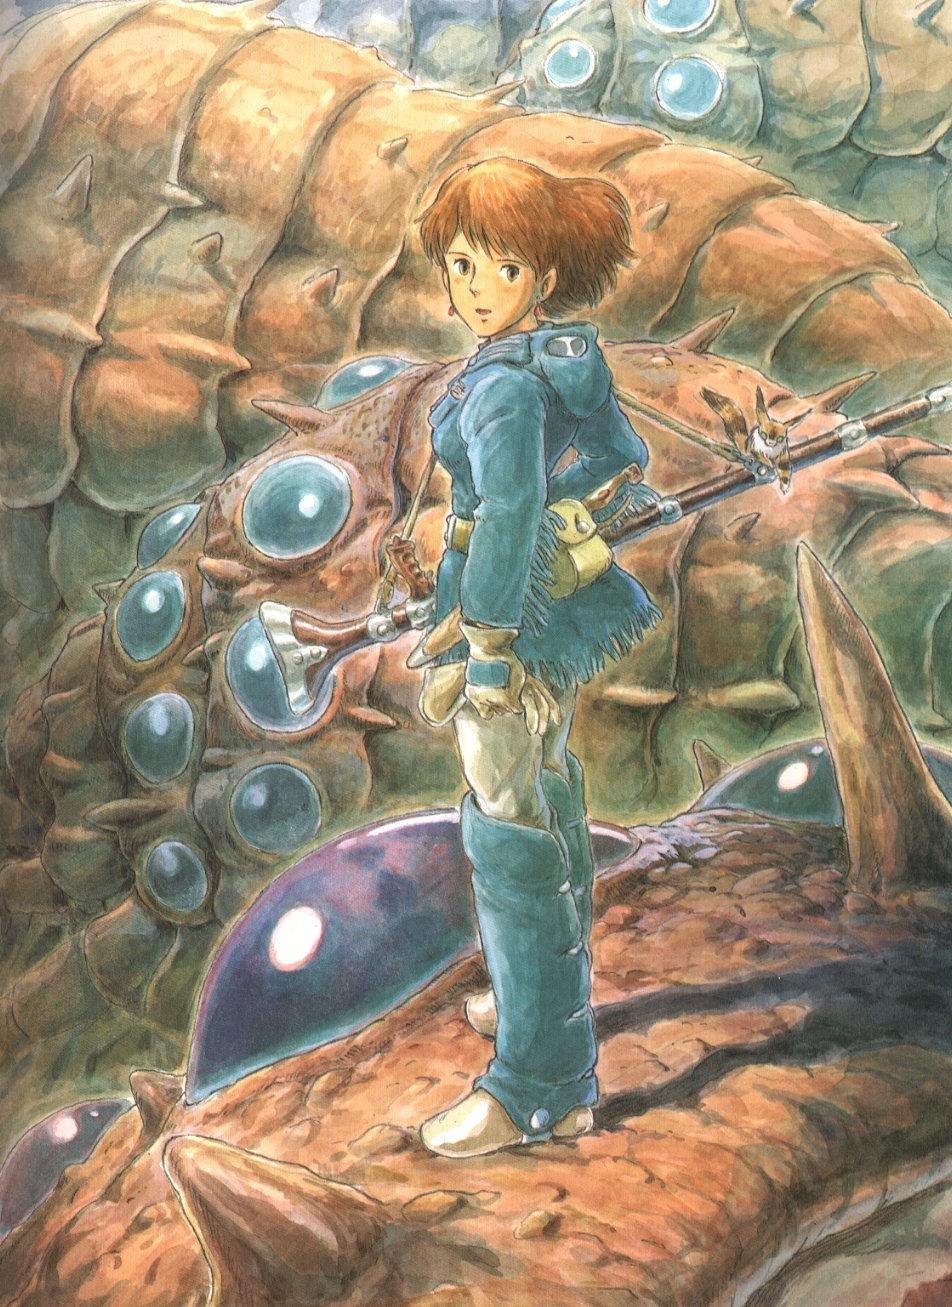 Télécharger - Nausicaa Of The Valley Of The Wind Manga Cover , HD Wallpaper & Backgrounds